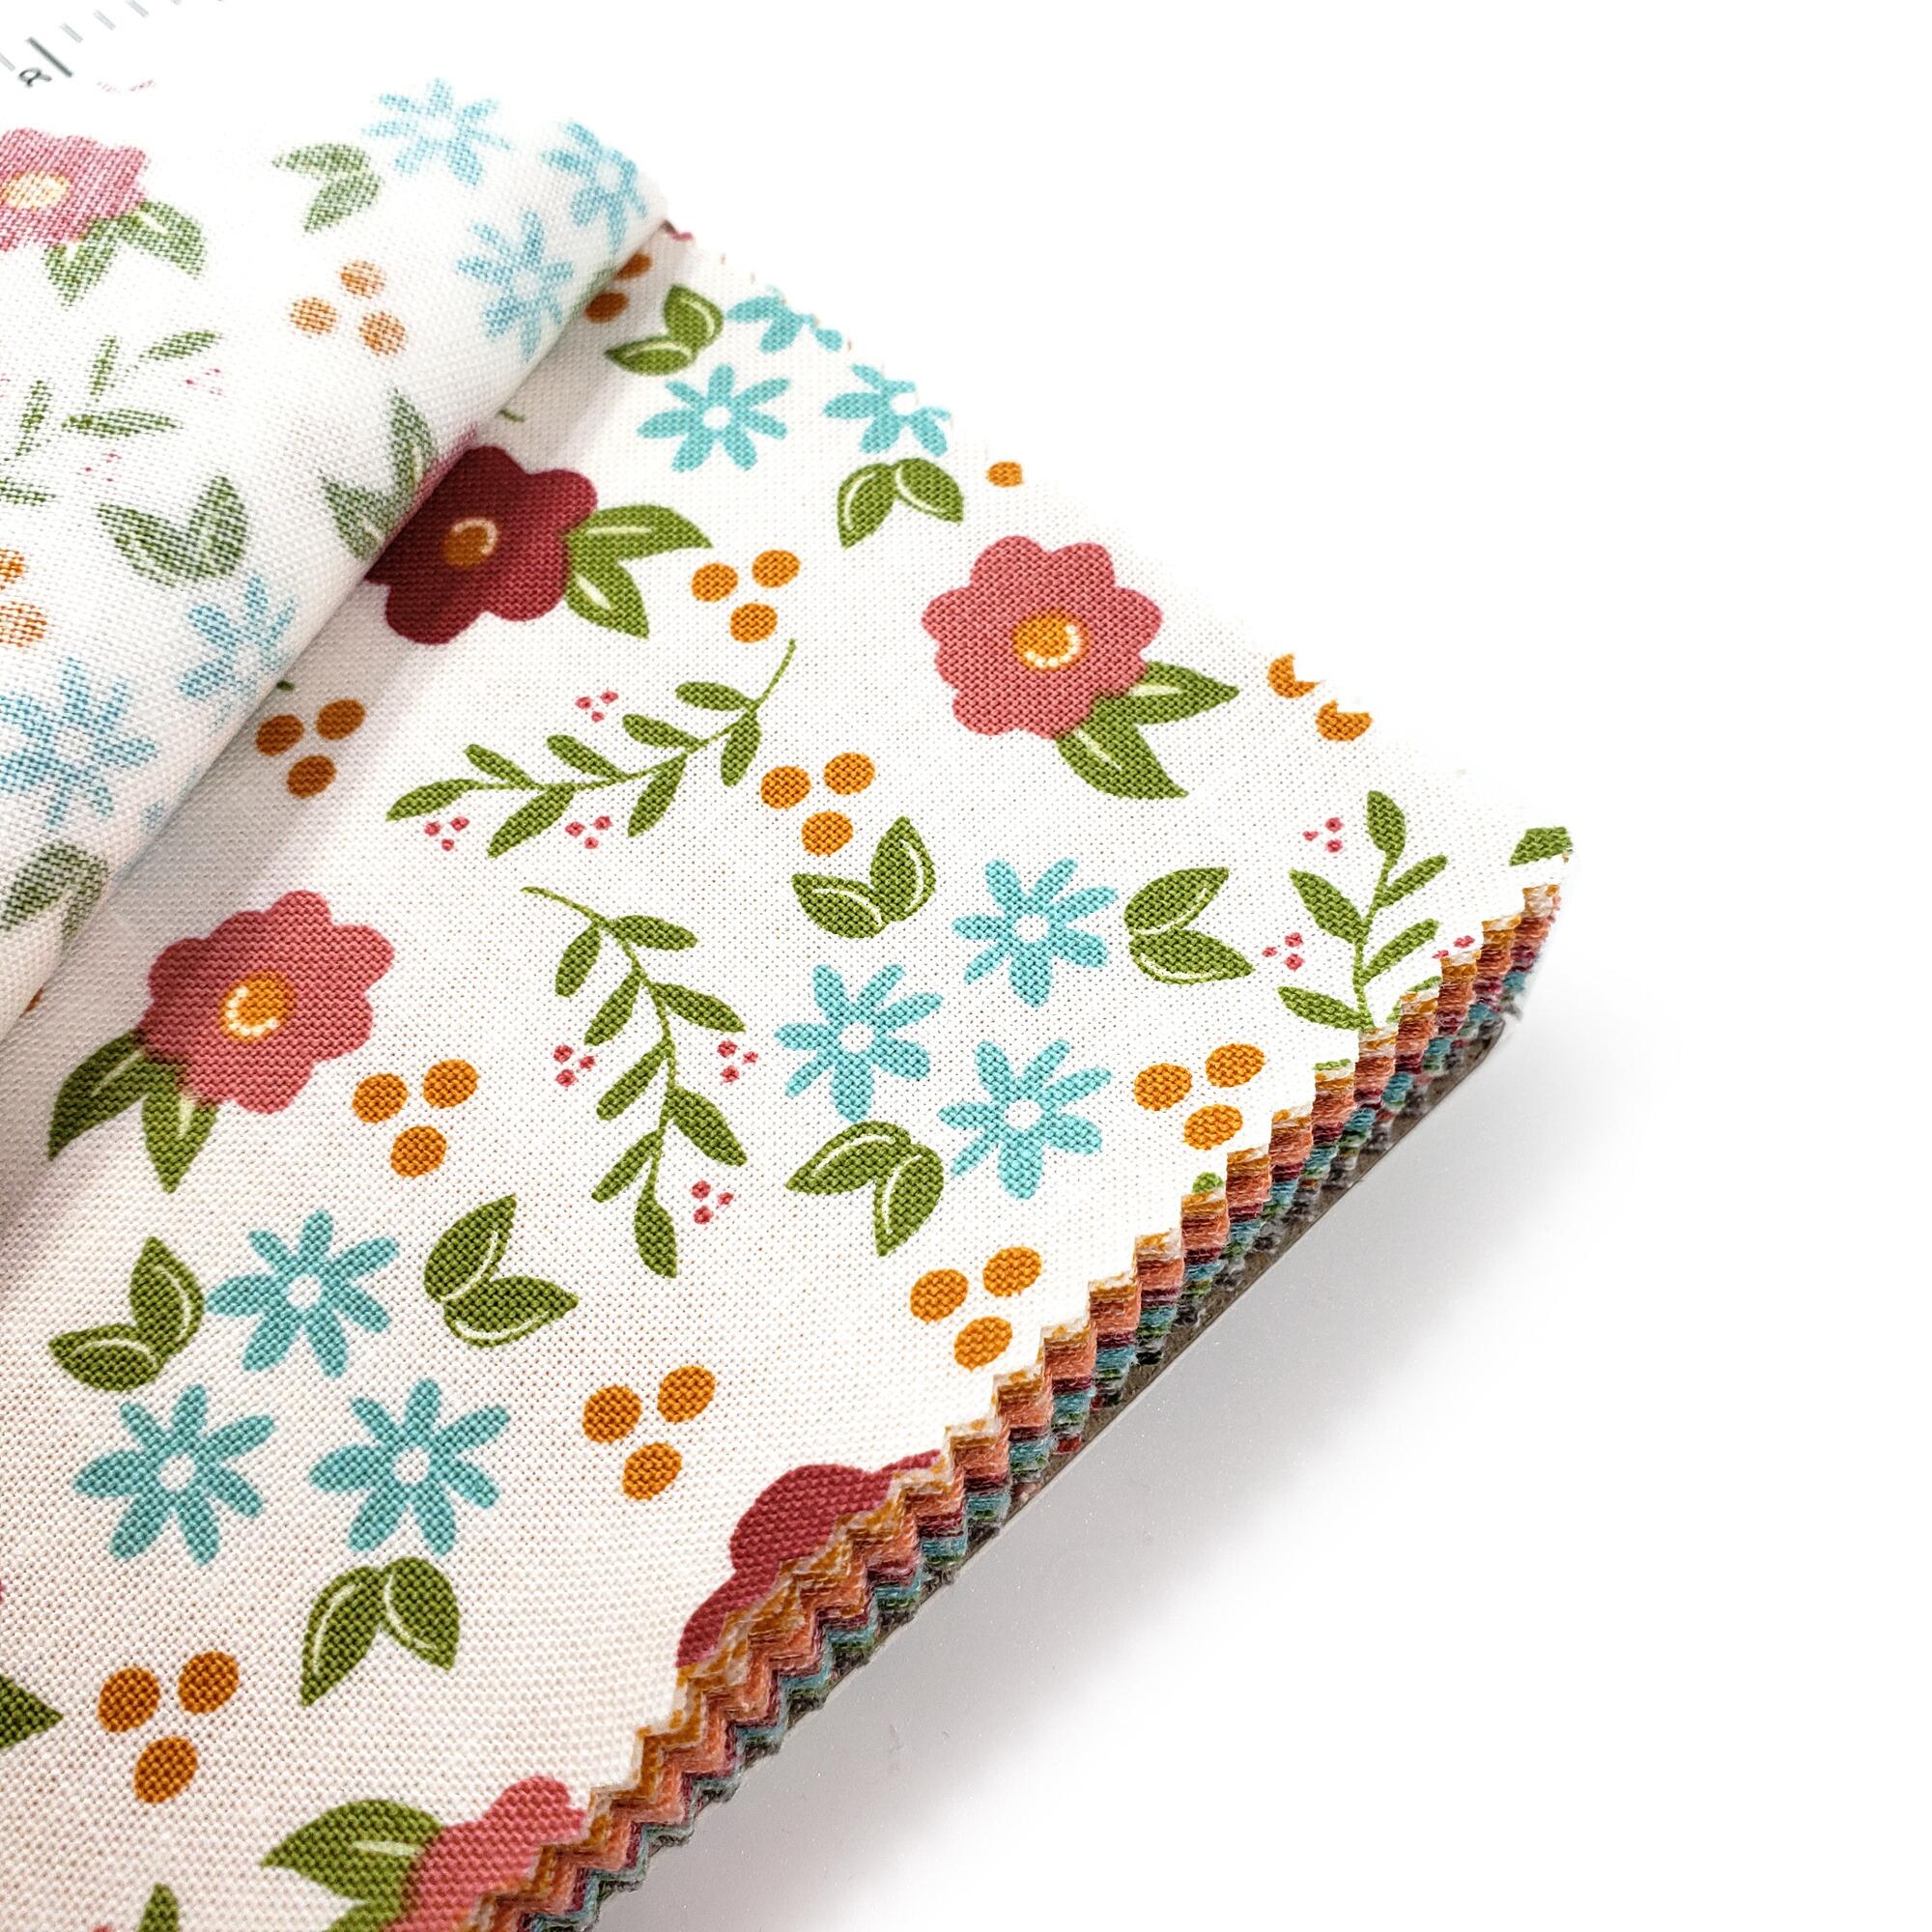 moda,bountiful blooms, sherri,chelsi, fabric squares,cotton,colourful,patchwork strips, spots, floral, birds, cute